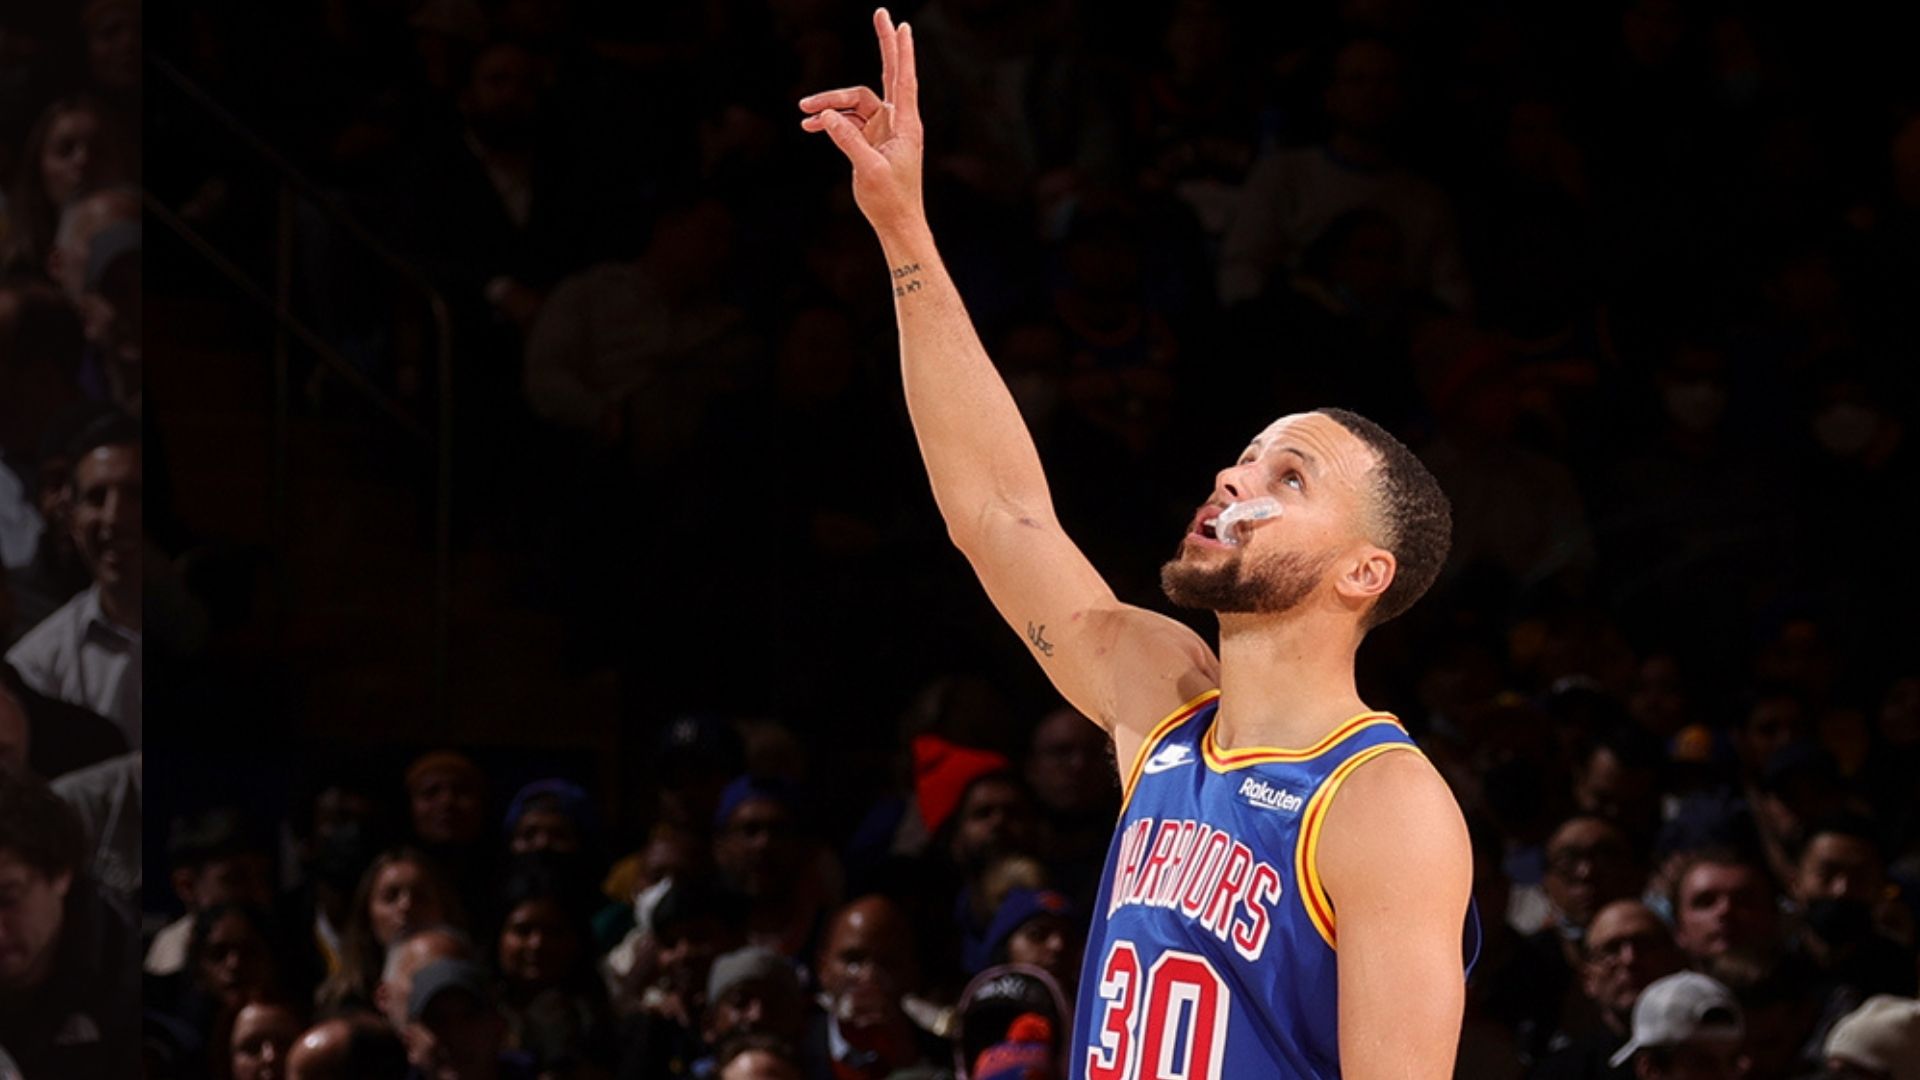 Warriors thrash the Knicks, with Steph Curry setting a new record